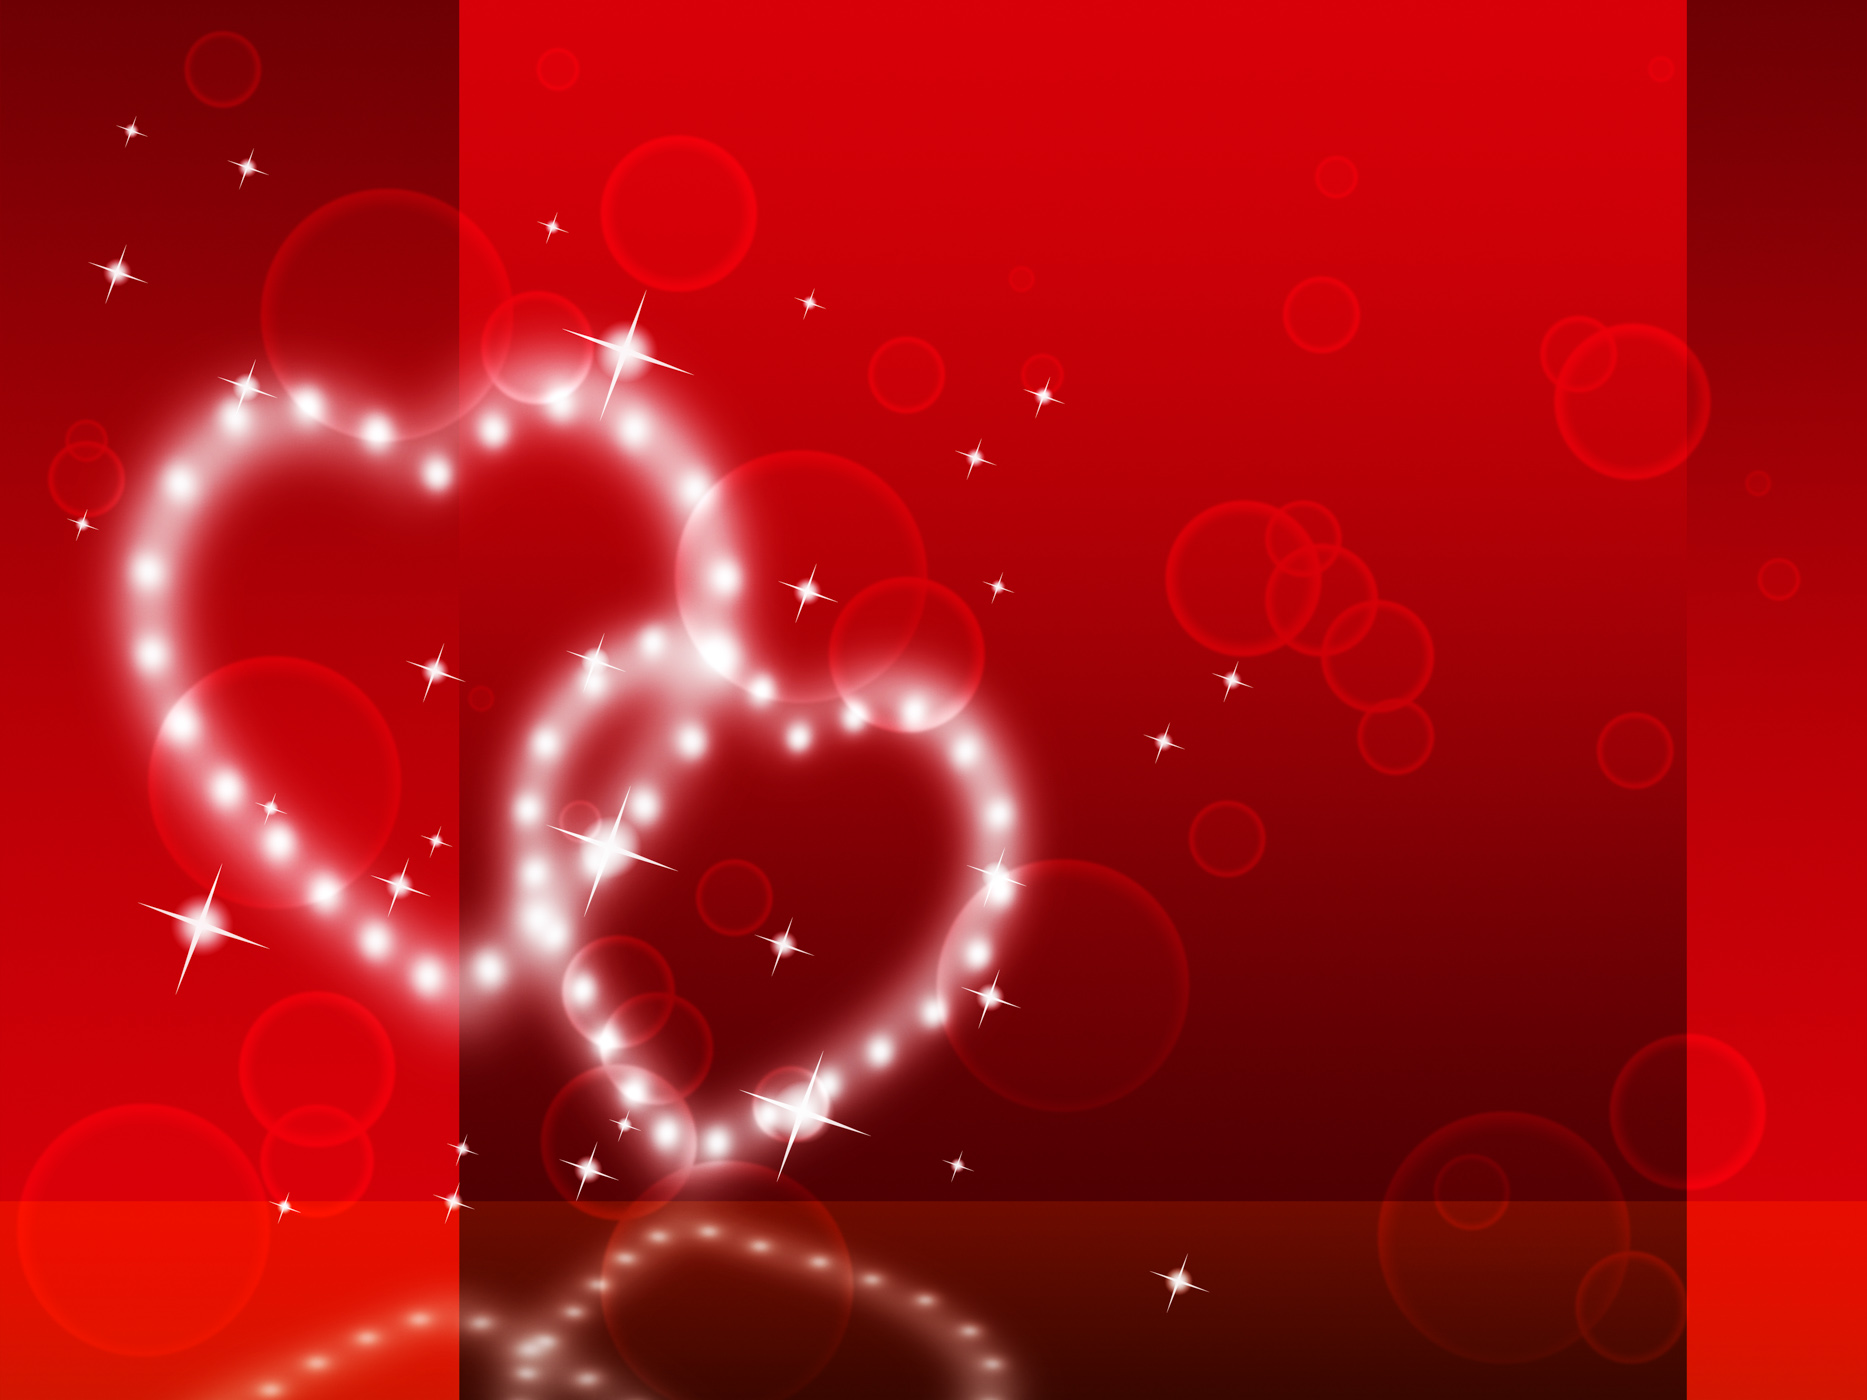 Red hearts background shows fondness special and sparkling photo